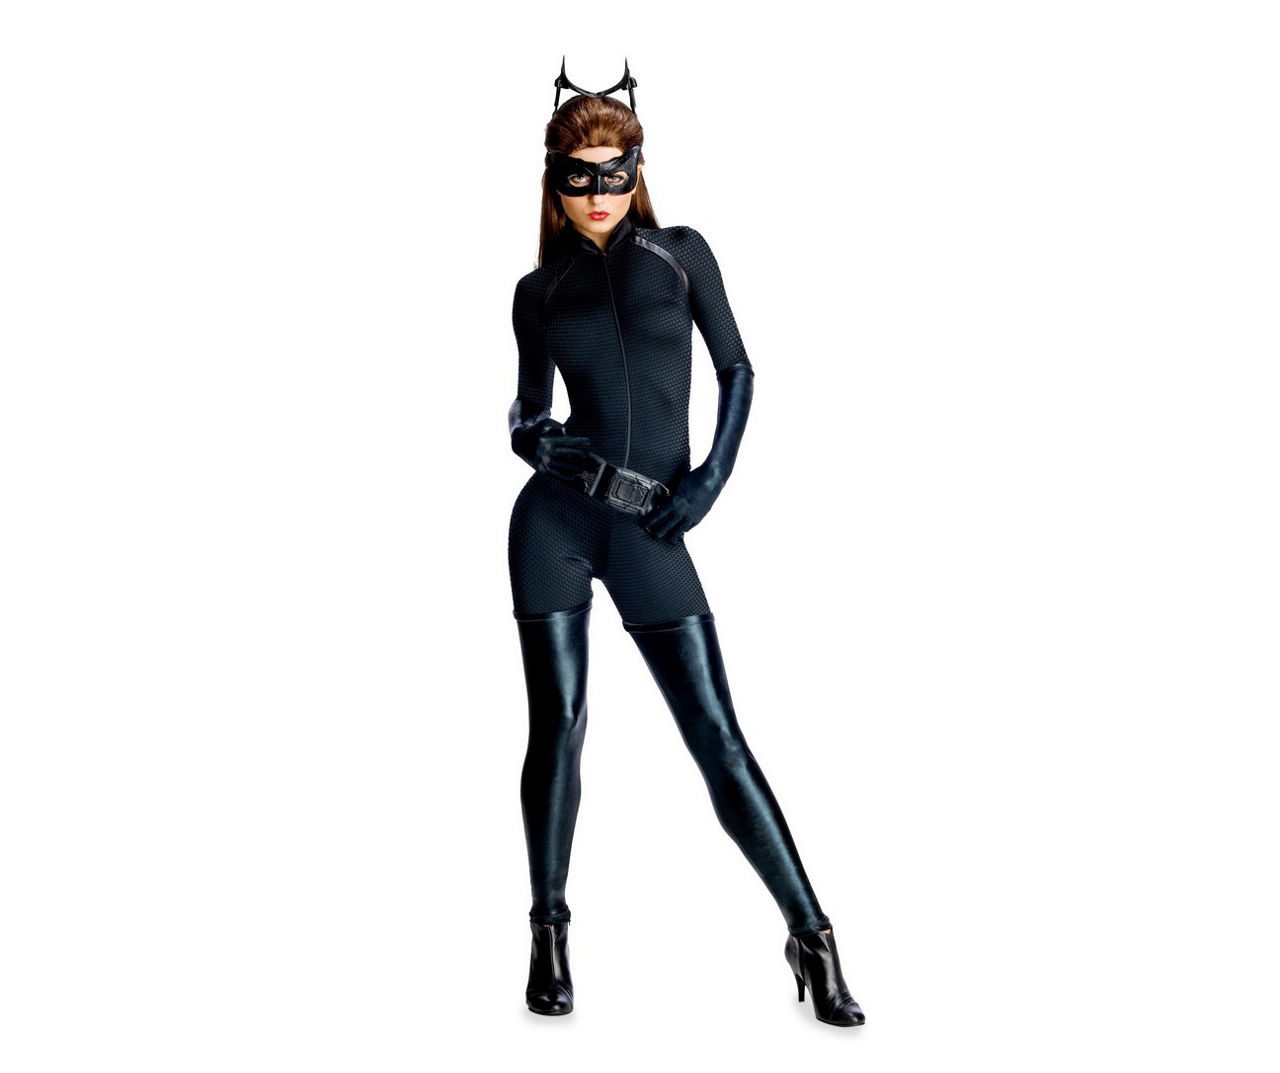 Adult Size S The Dark Knight Rises Catwoman Costume